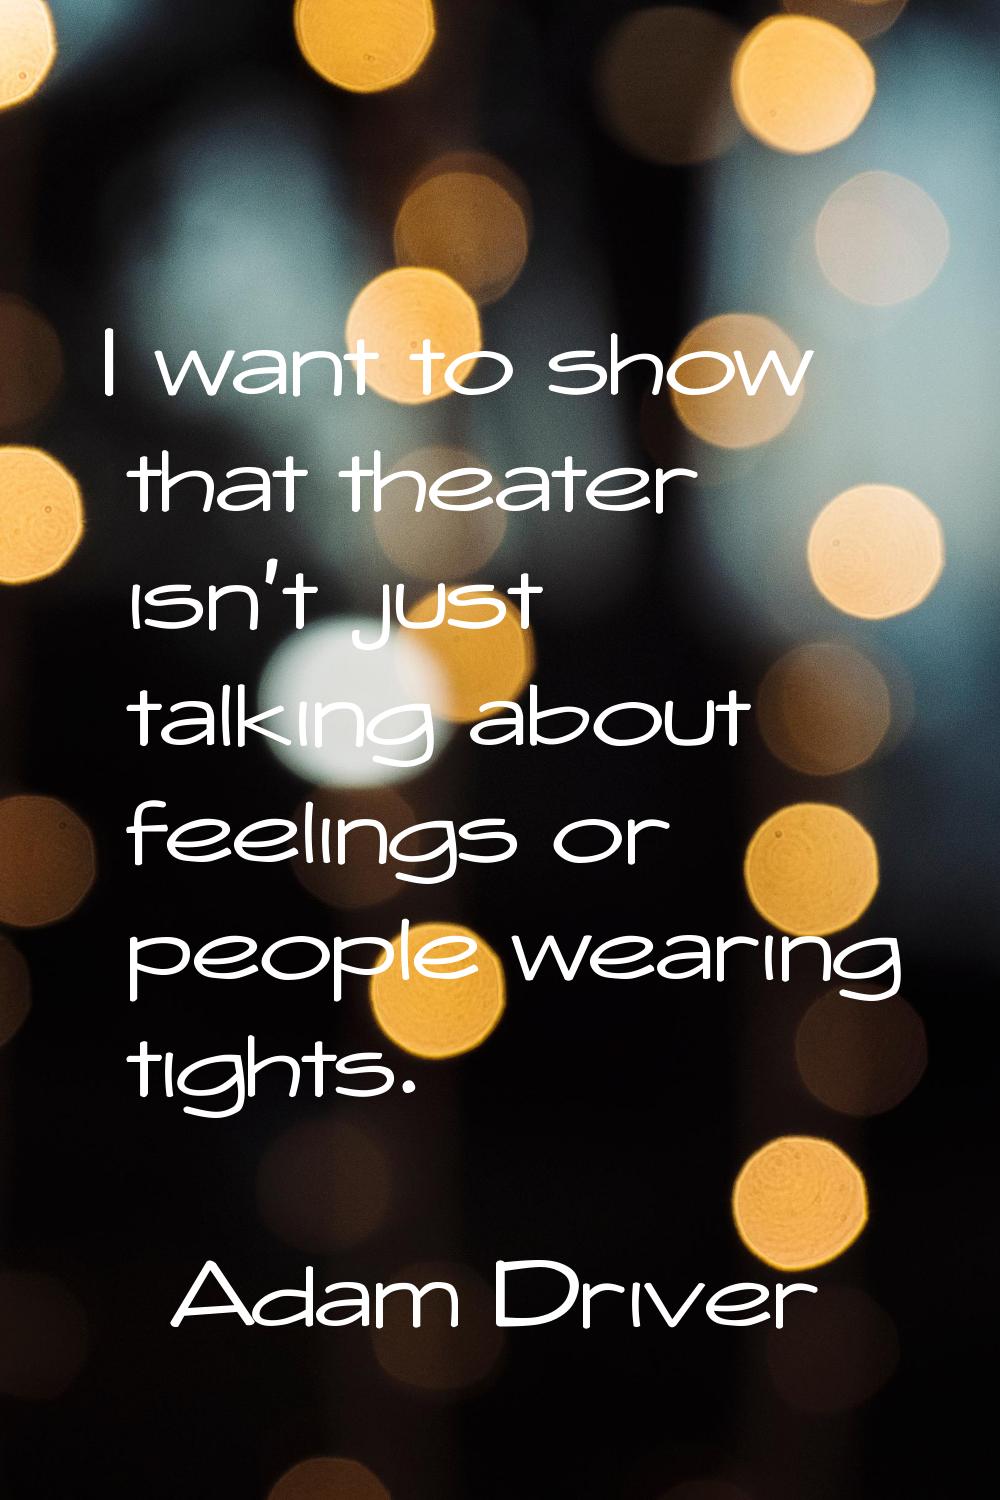 I want to show that theater isn't just talking about feelings or people wearing tights.